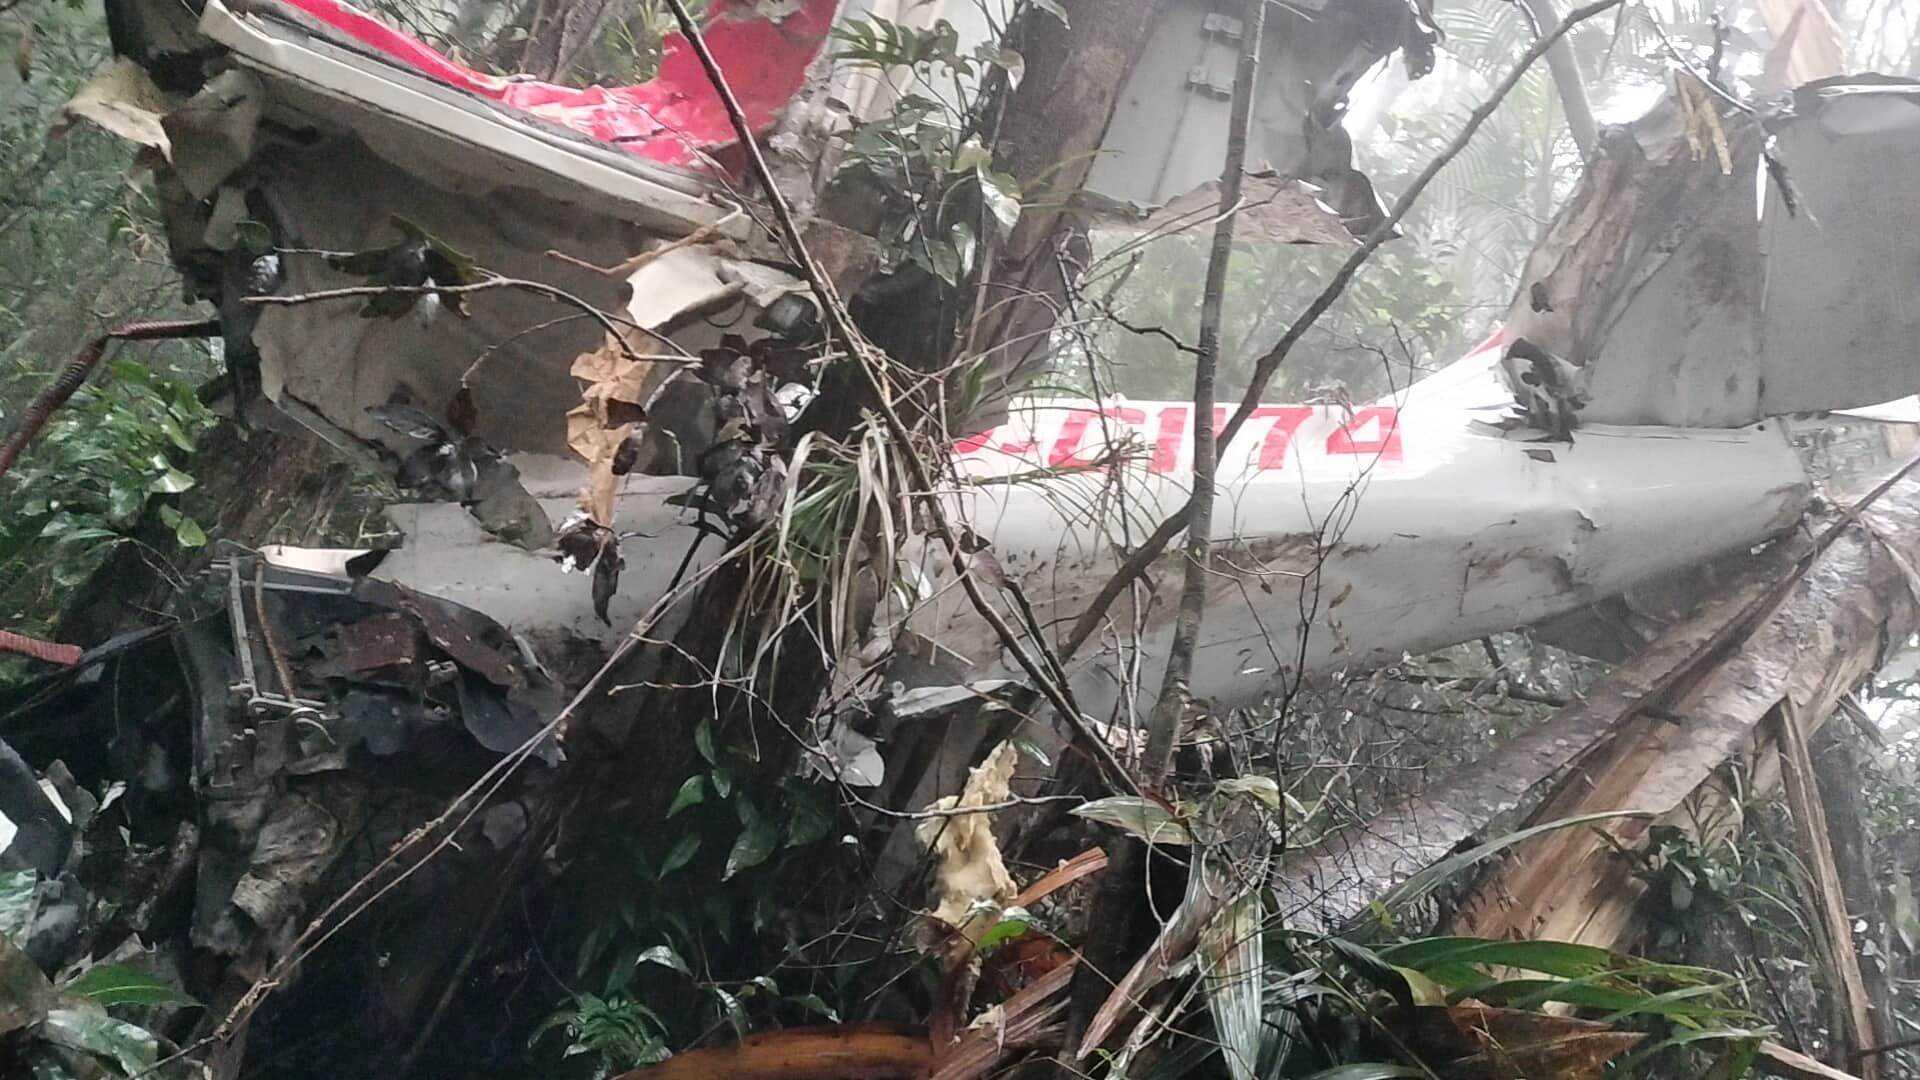 Remains of six Cessna plane crash retrieved in Isabela